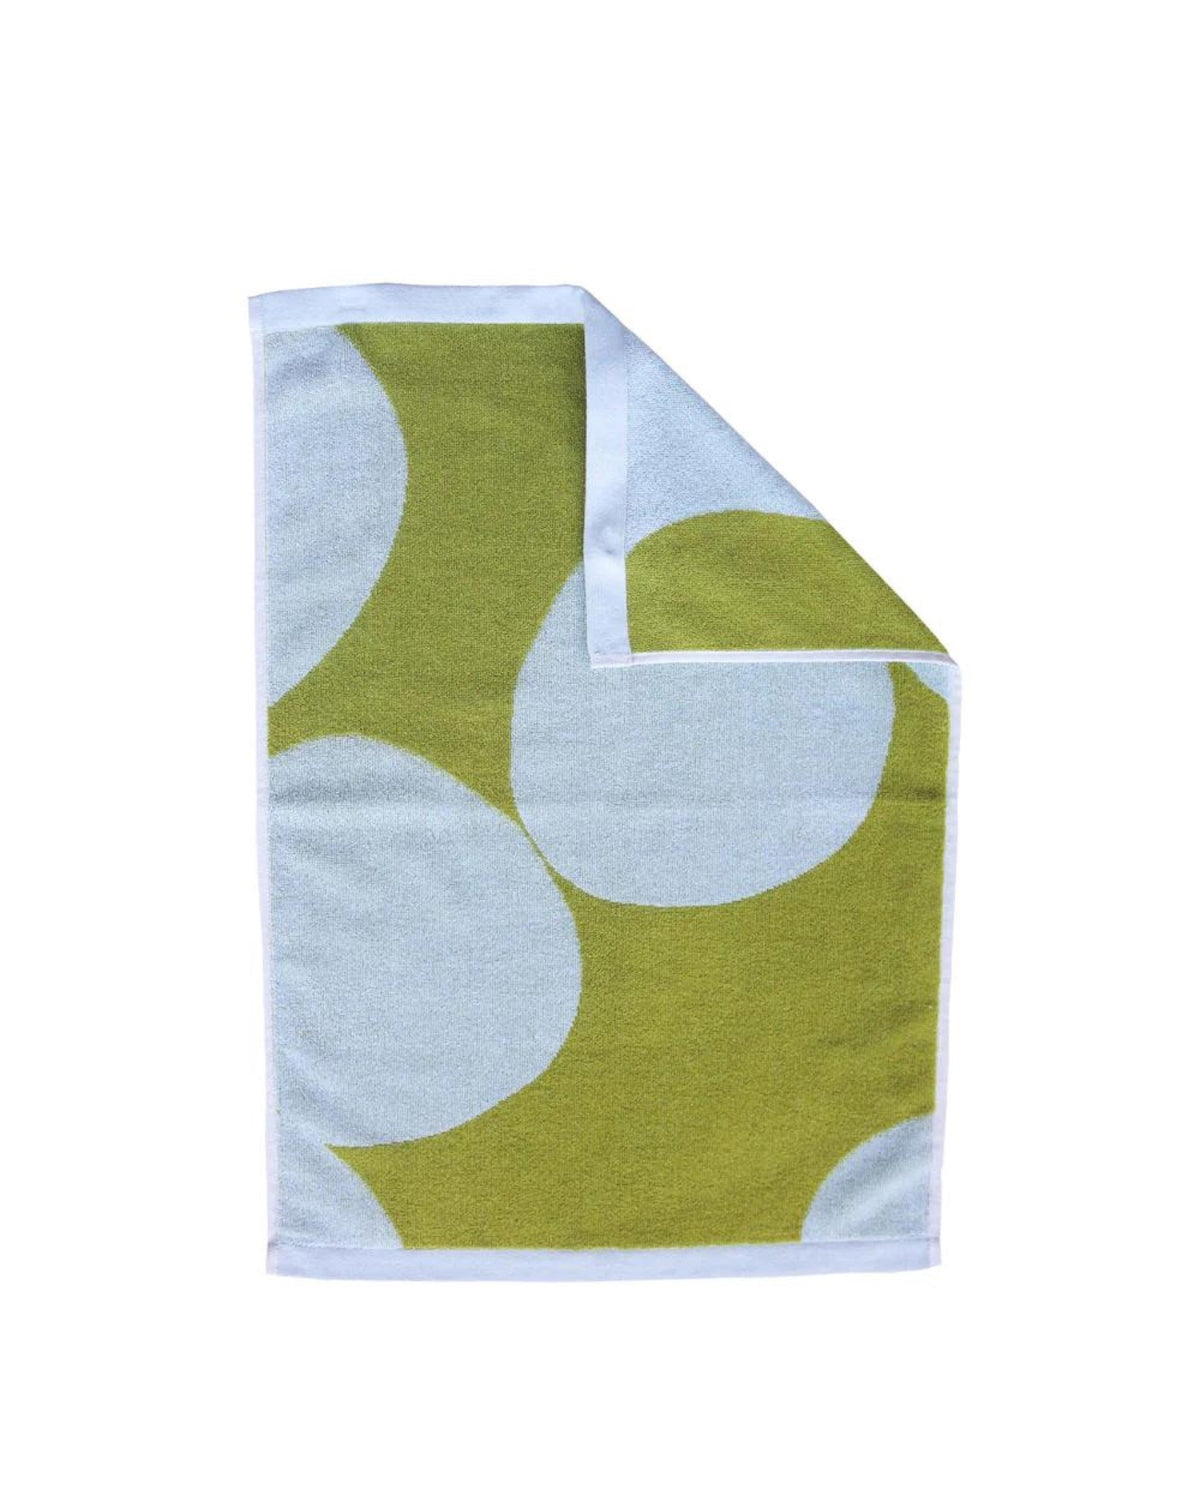 Inspired by nature's pebbles, this bold print in green and aqua tones brings the outside in, creating a soothing palette that layers effortlessly in any children's bathroom. Designed to bring luxury into the bathroom, this ultra-plush hand towel is made from 100% organic cotton and so much fun.&nbsp;